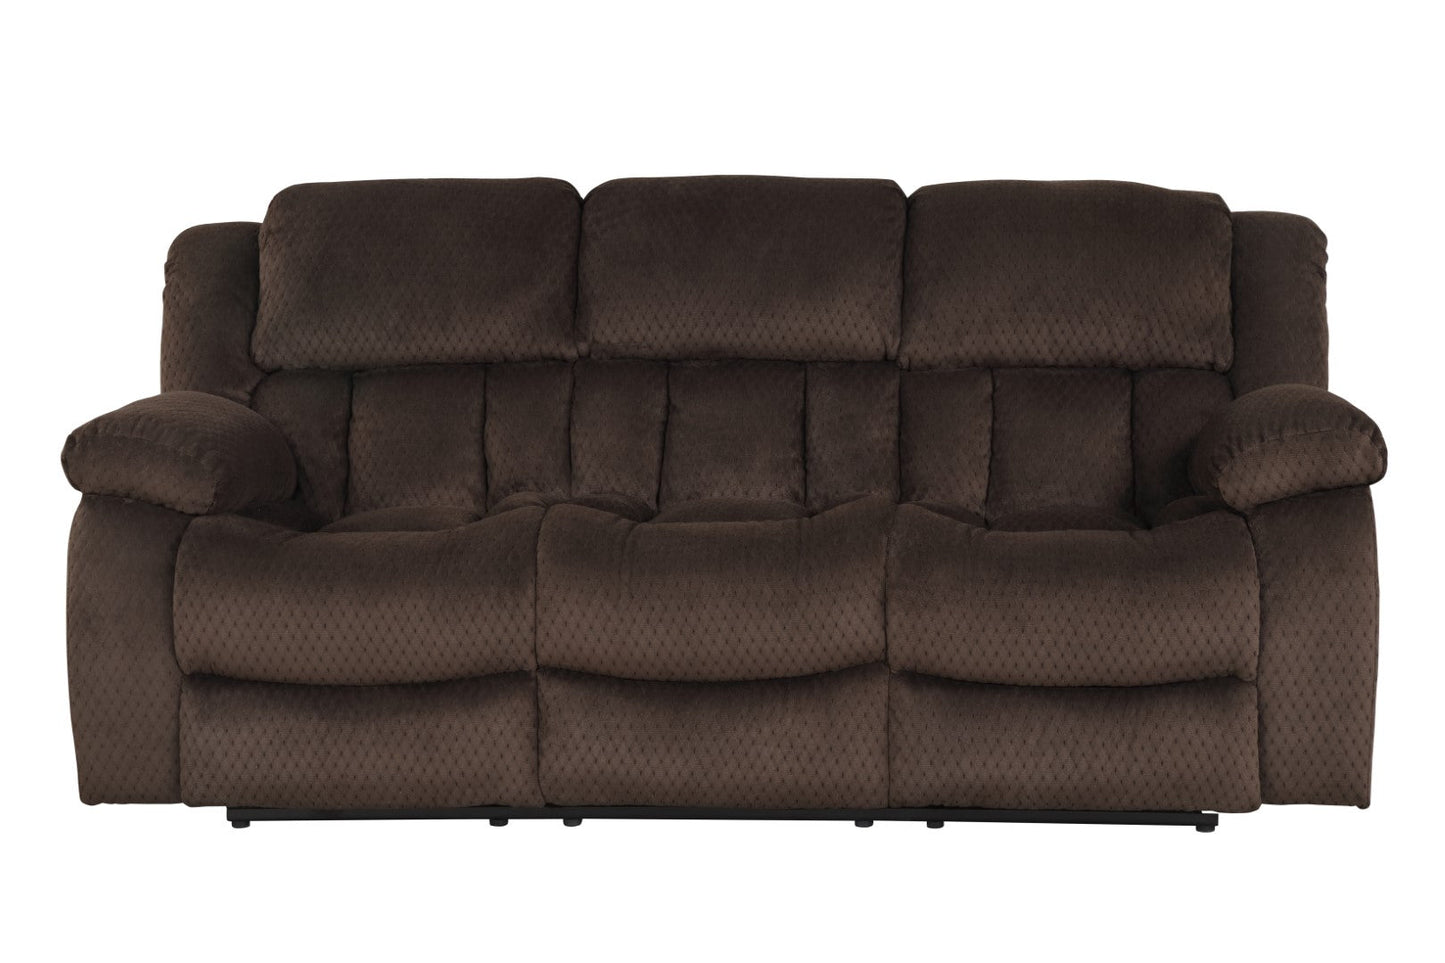 Galaxy Home Armada Manual Reclining Sofa Made with Chenille Fabric Brown Chenille Fabric